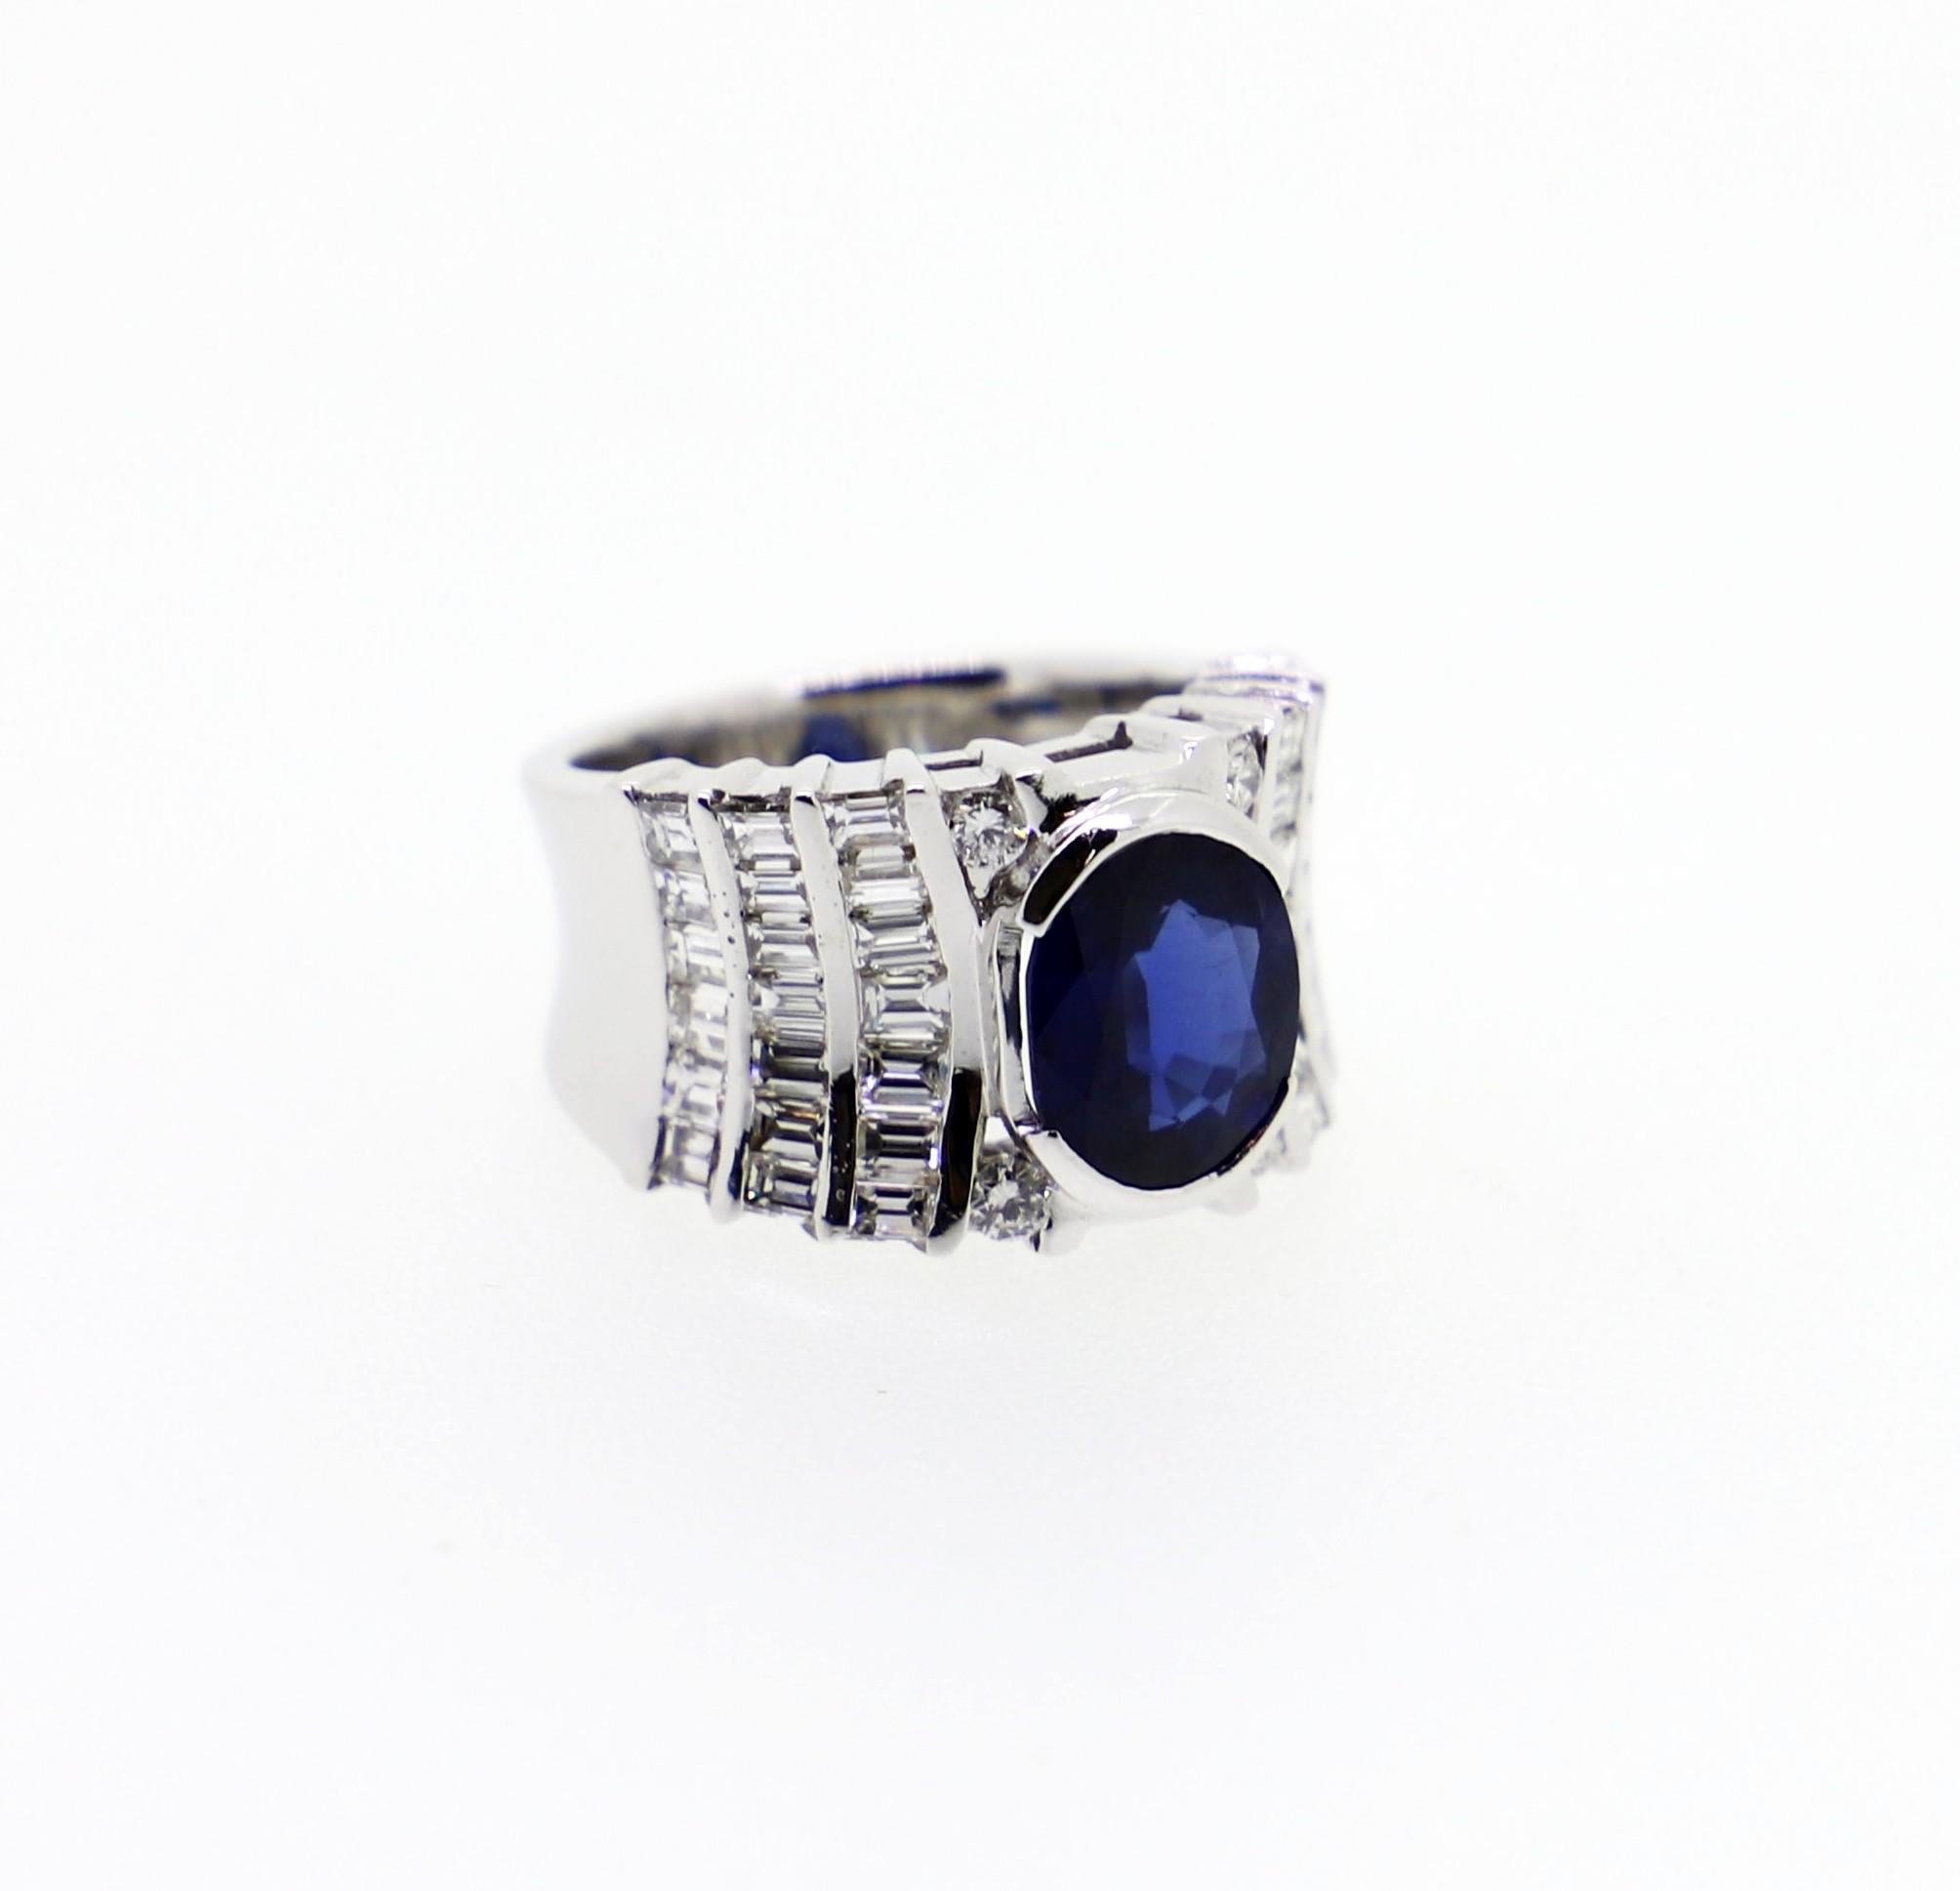 3.20 Carat Oval Sapphire and White Diamonds Cocktail Ring For Sale 1